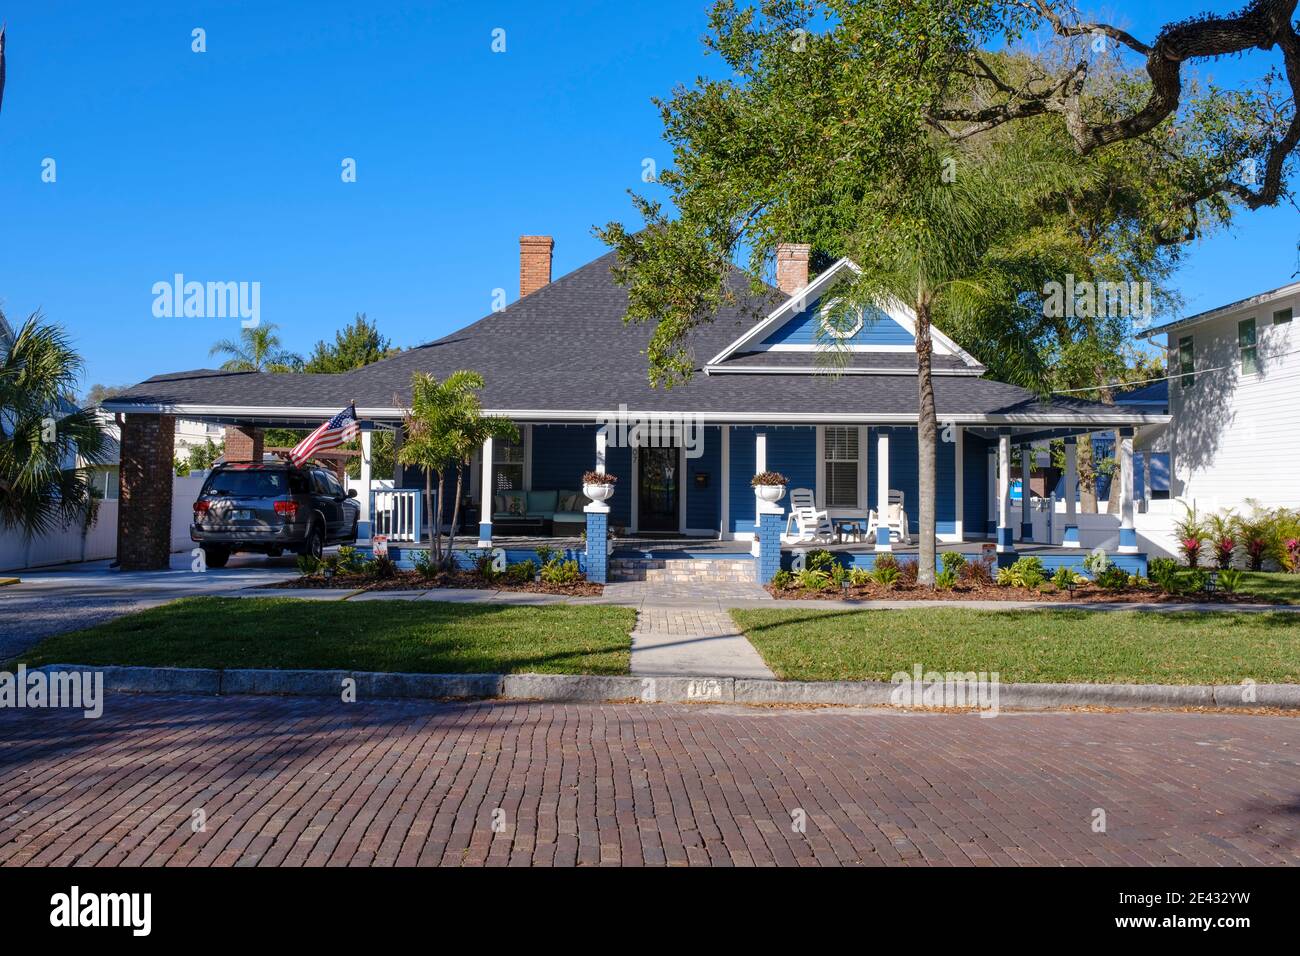 Desirable home - Tampa Heights, Tampa, Florida. Established in 1883. The neighborhood is going through gentrification. Stock Photo